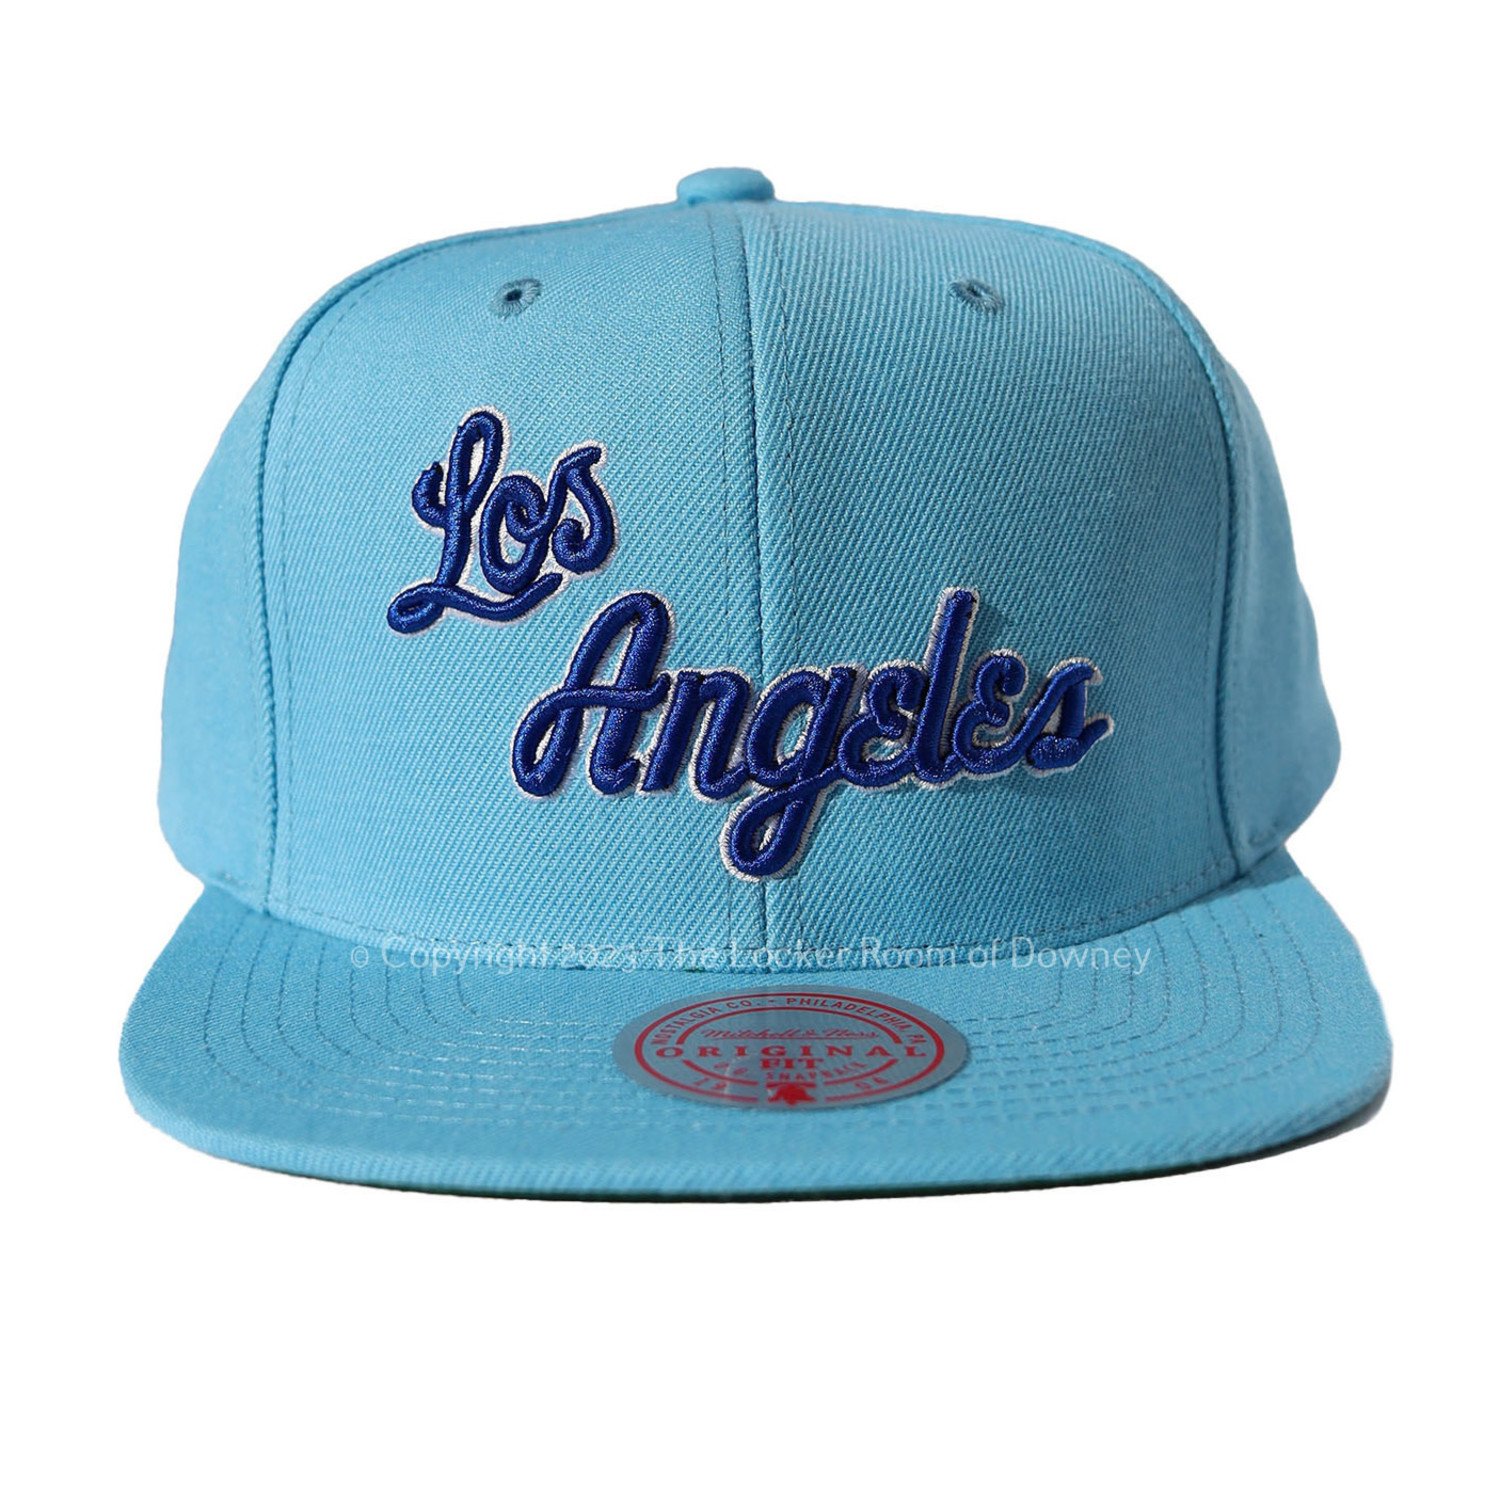 Mitchell and Ness LA Lakers M&N Like Mike Snapback Green